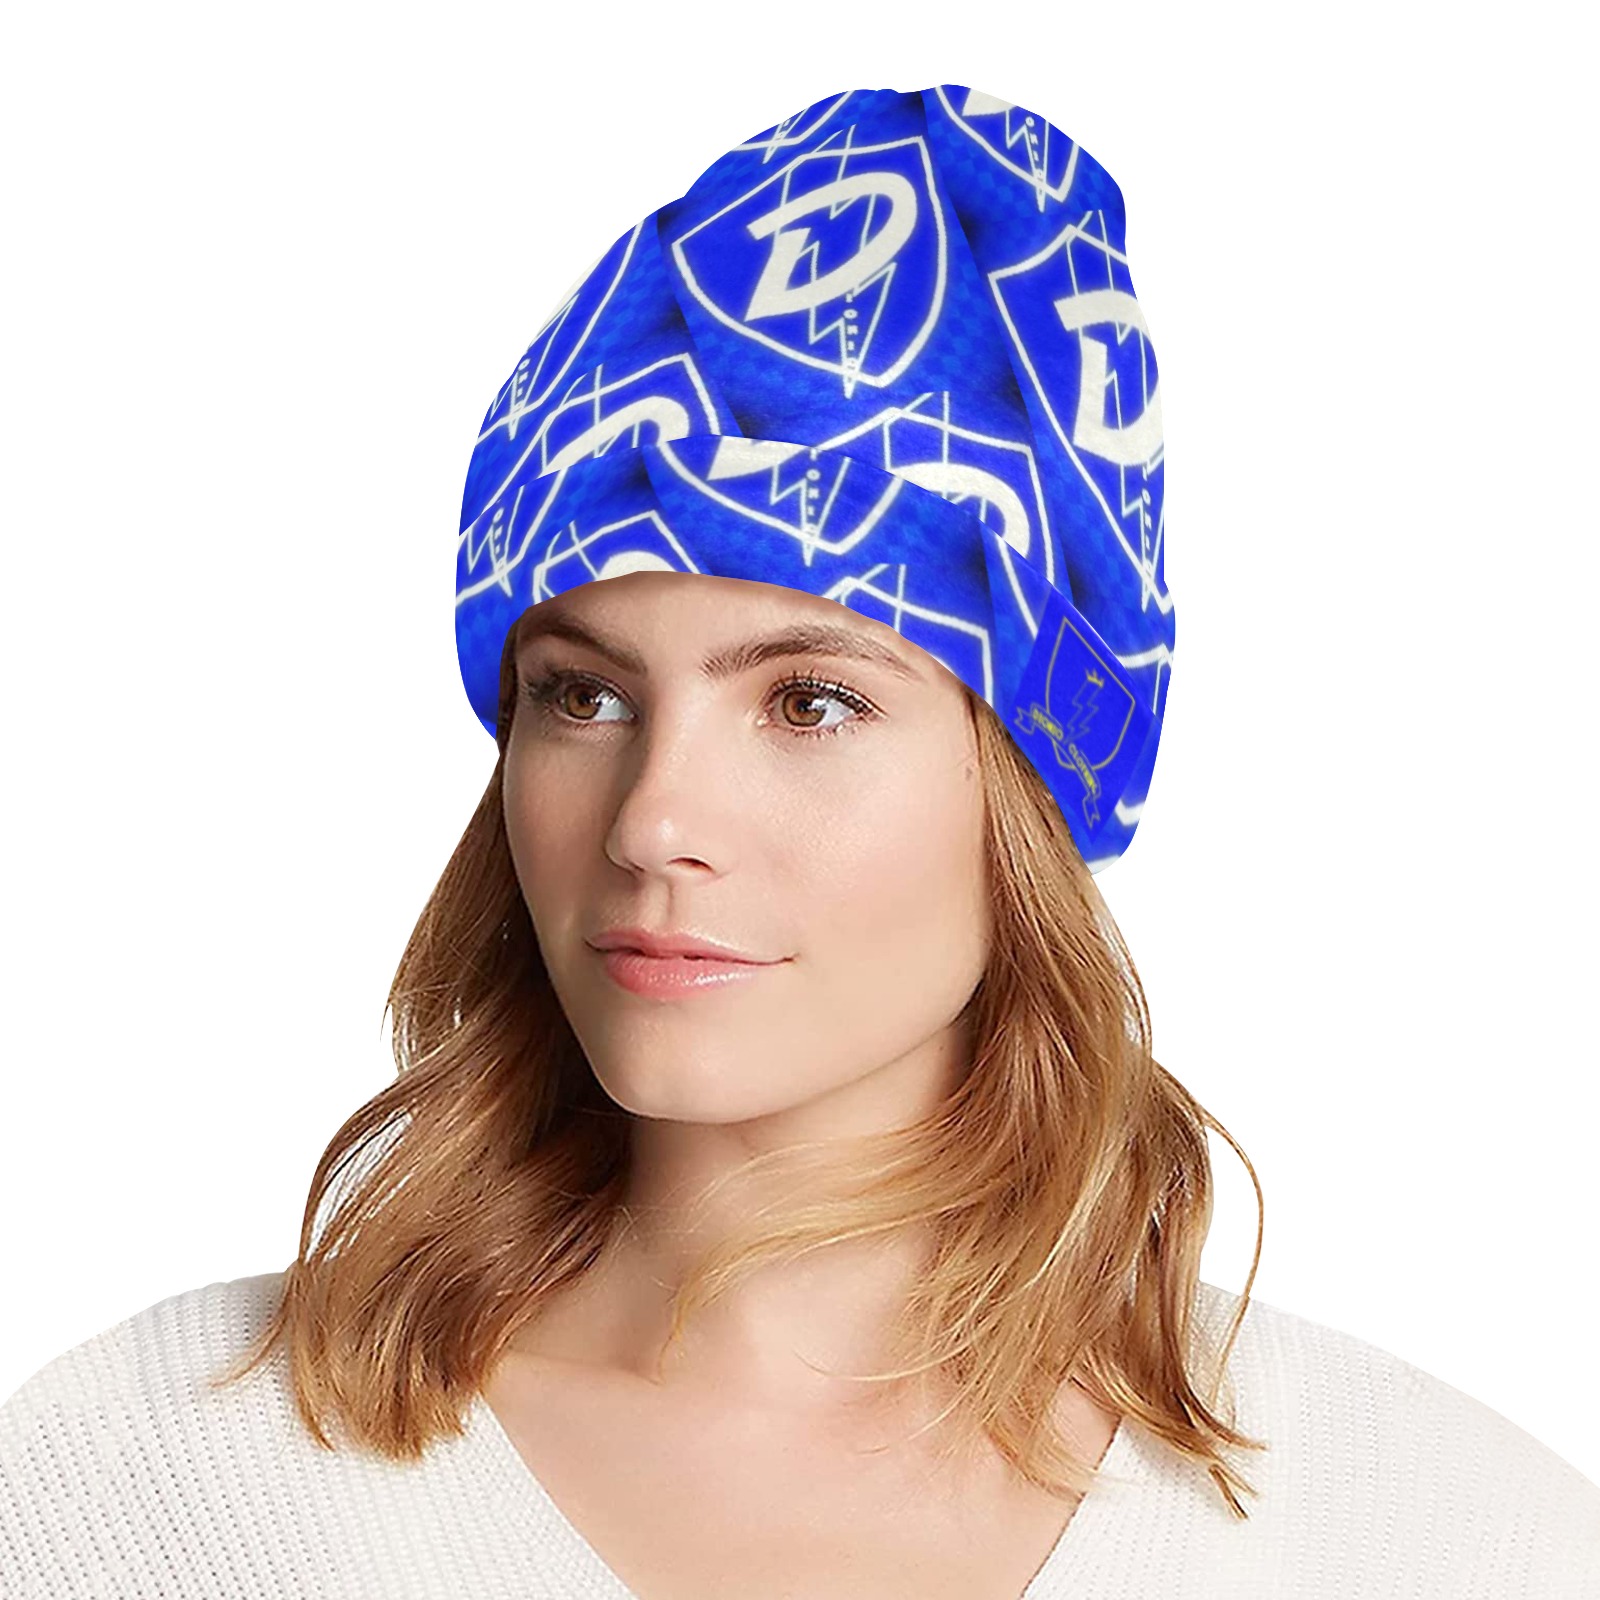 DIONIO Clothing - Blue & White D Shield Repeat Beanie Hat All Over Print Beanie for Adults